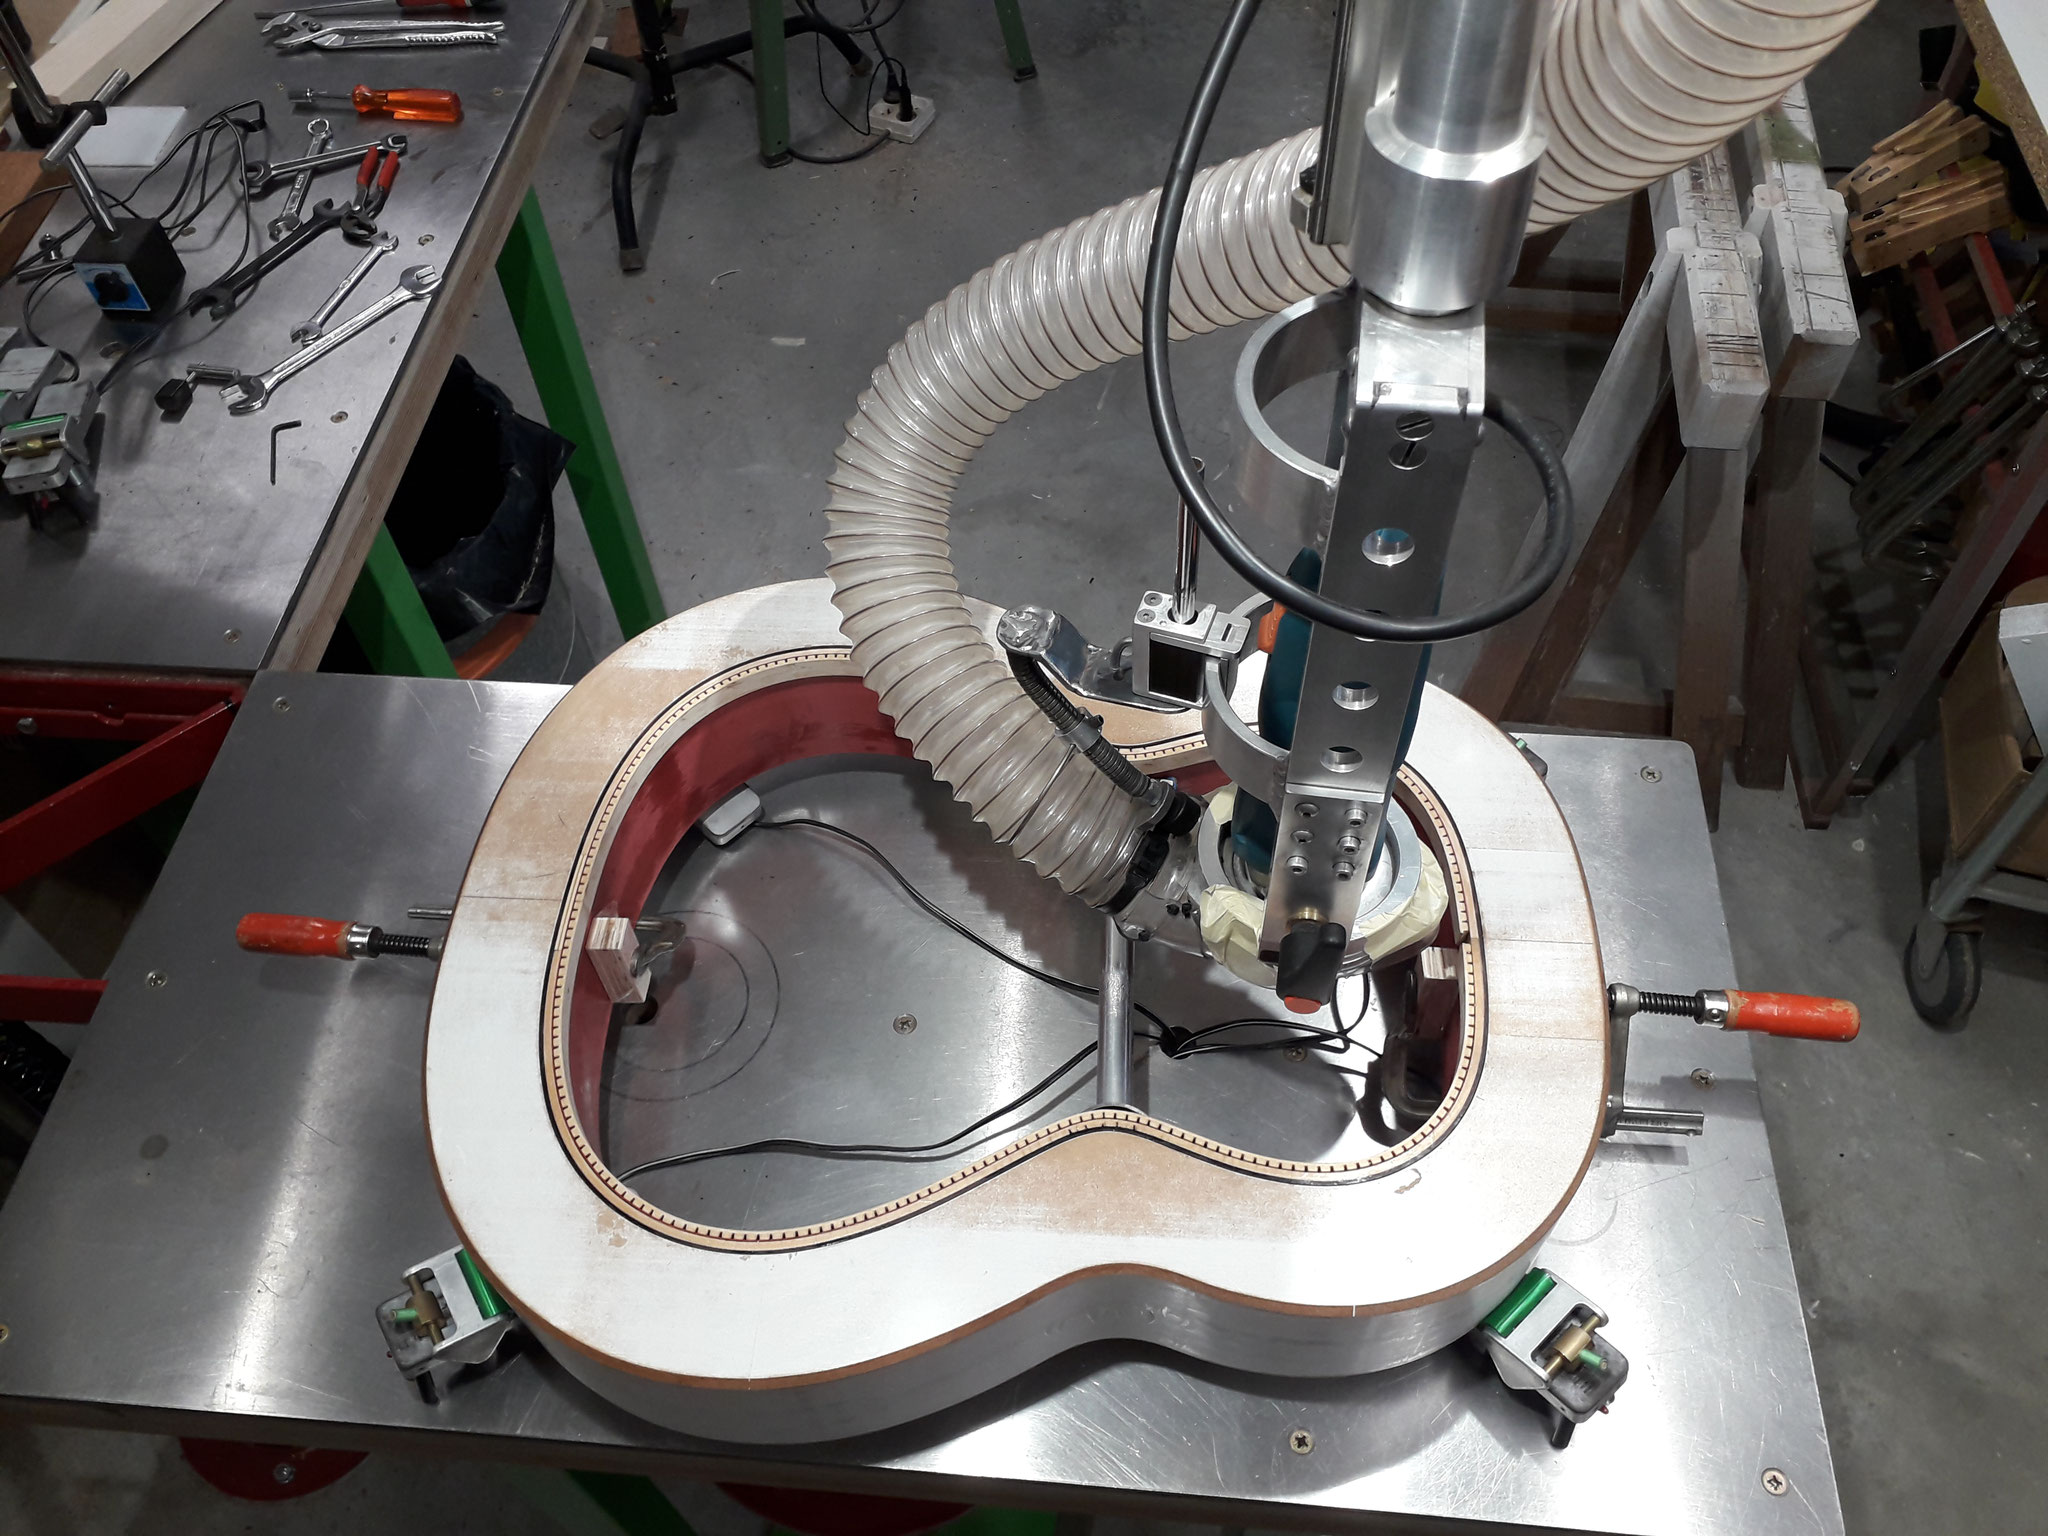 Process of milling the back strip using a specially designed tool